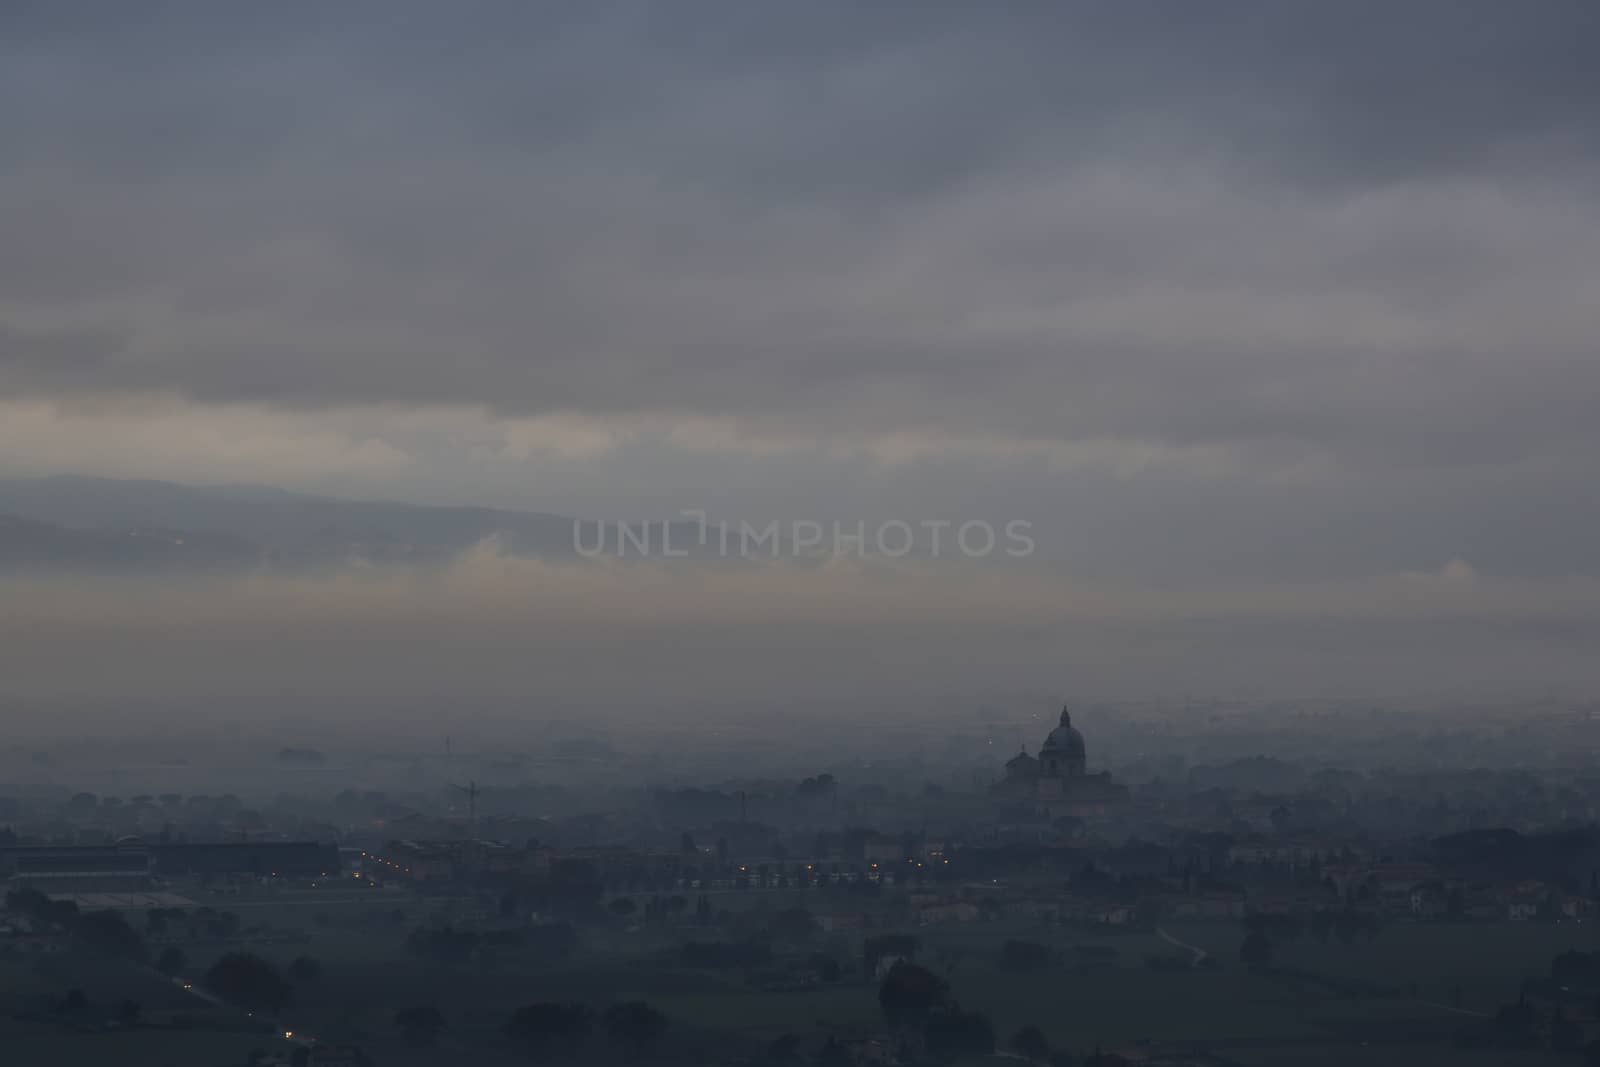 Distant view of a cathedral shrouded in fog